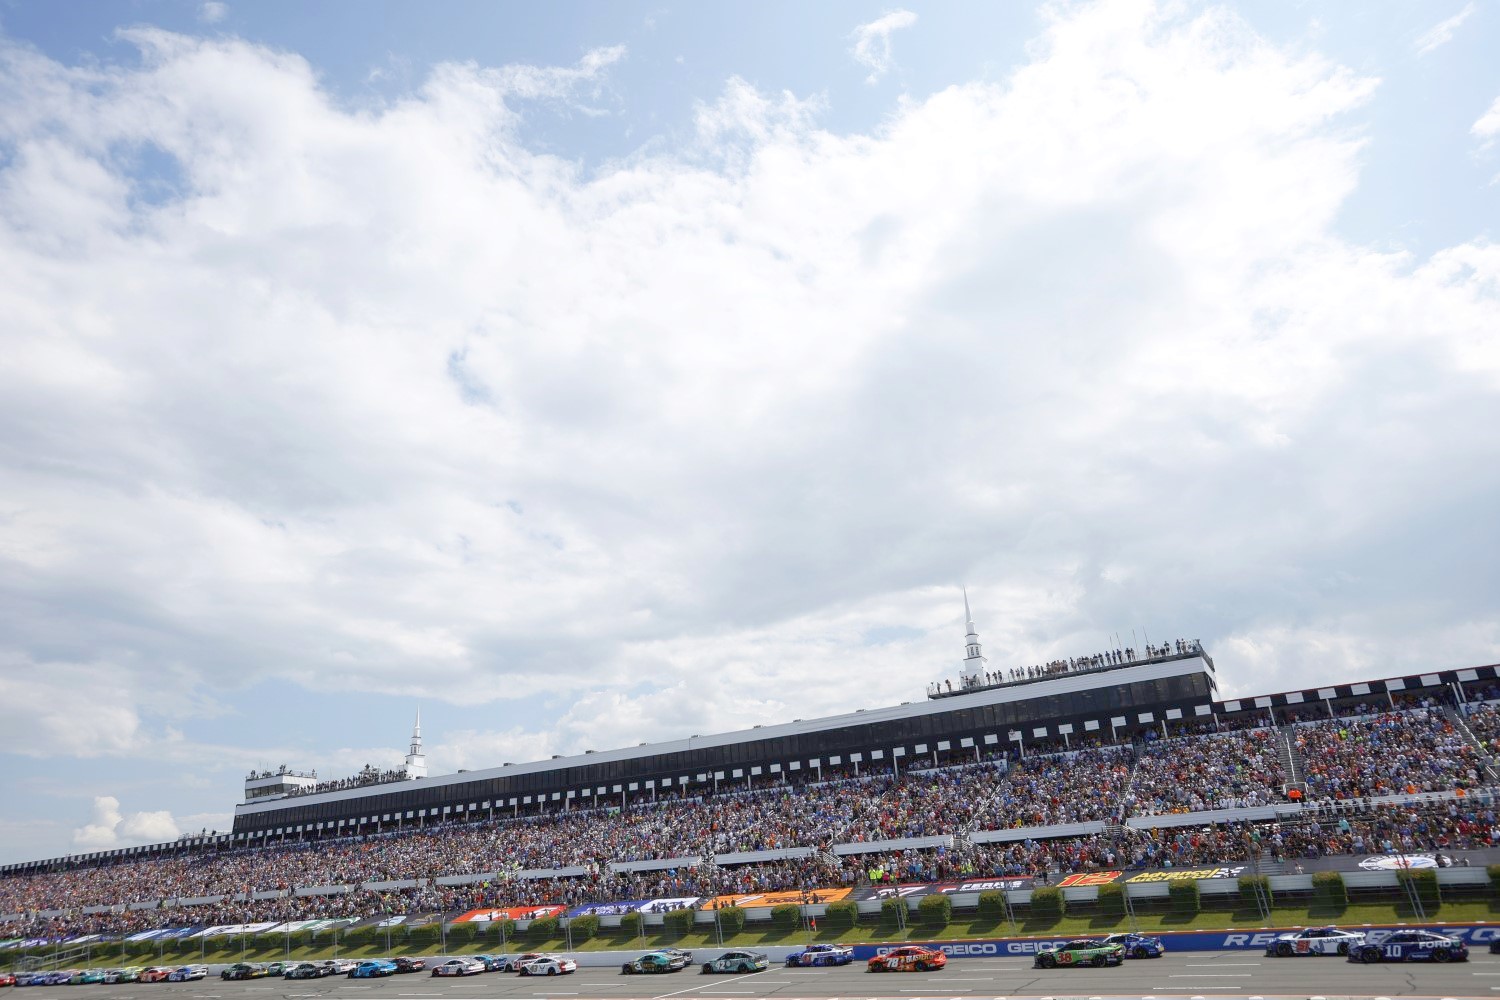 Sold-Out Race. A general view of racing during the NASCAR Cup Series HighPoint.com 400 at Pocono Raceway on July 23, 2023 in Long Pond, Pennsylvania. (Photo by Sean Gardner/Getty Images)